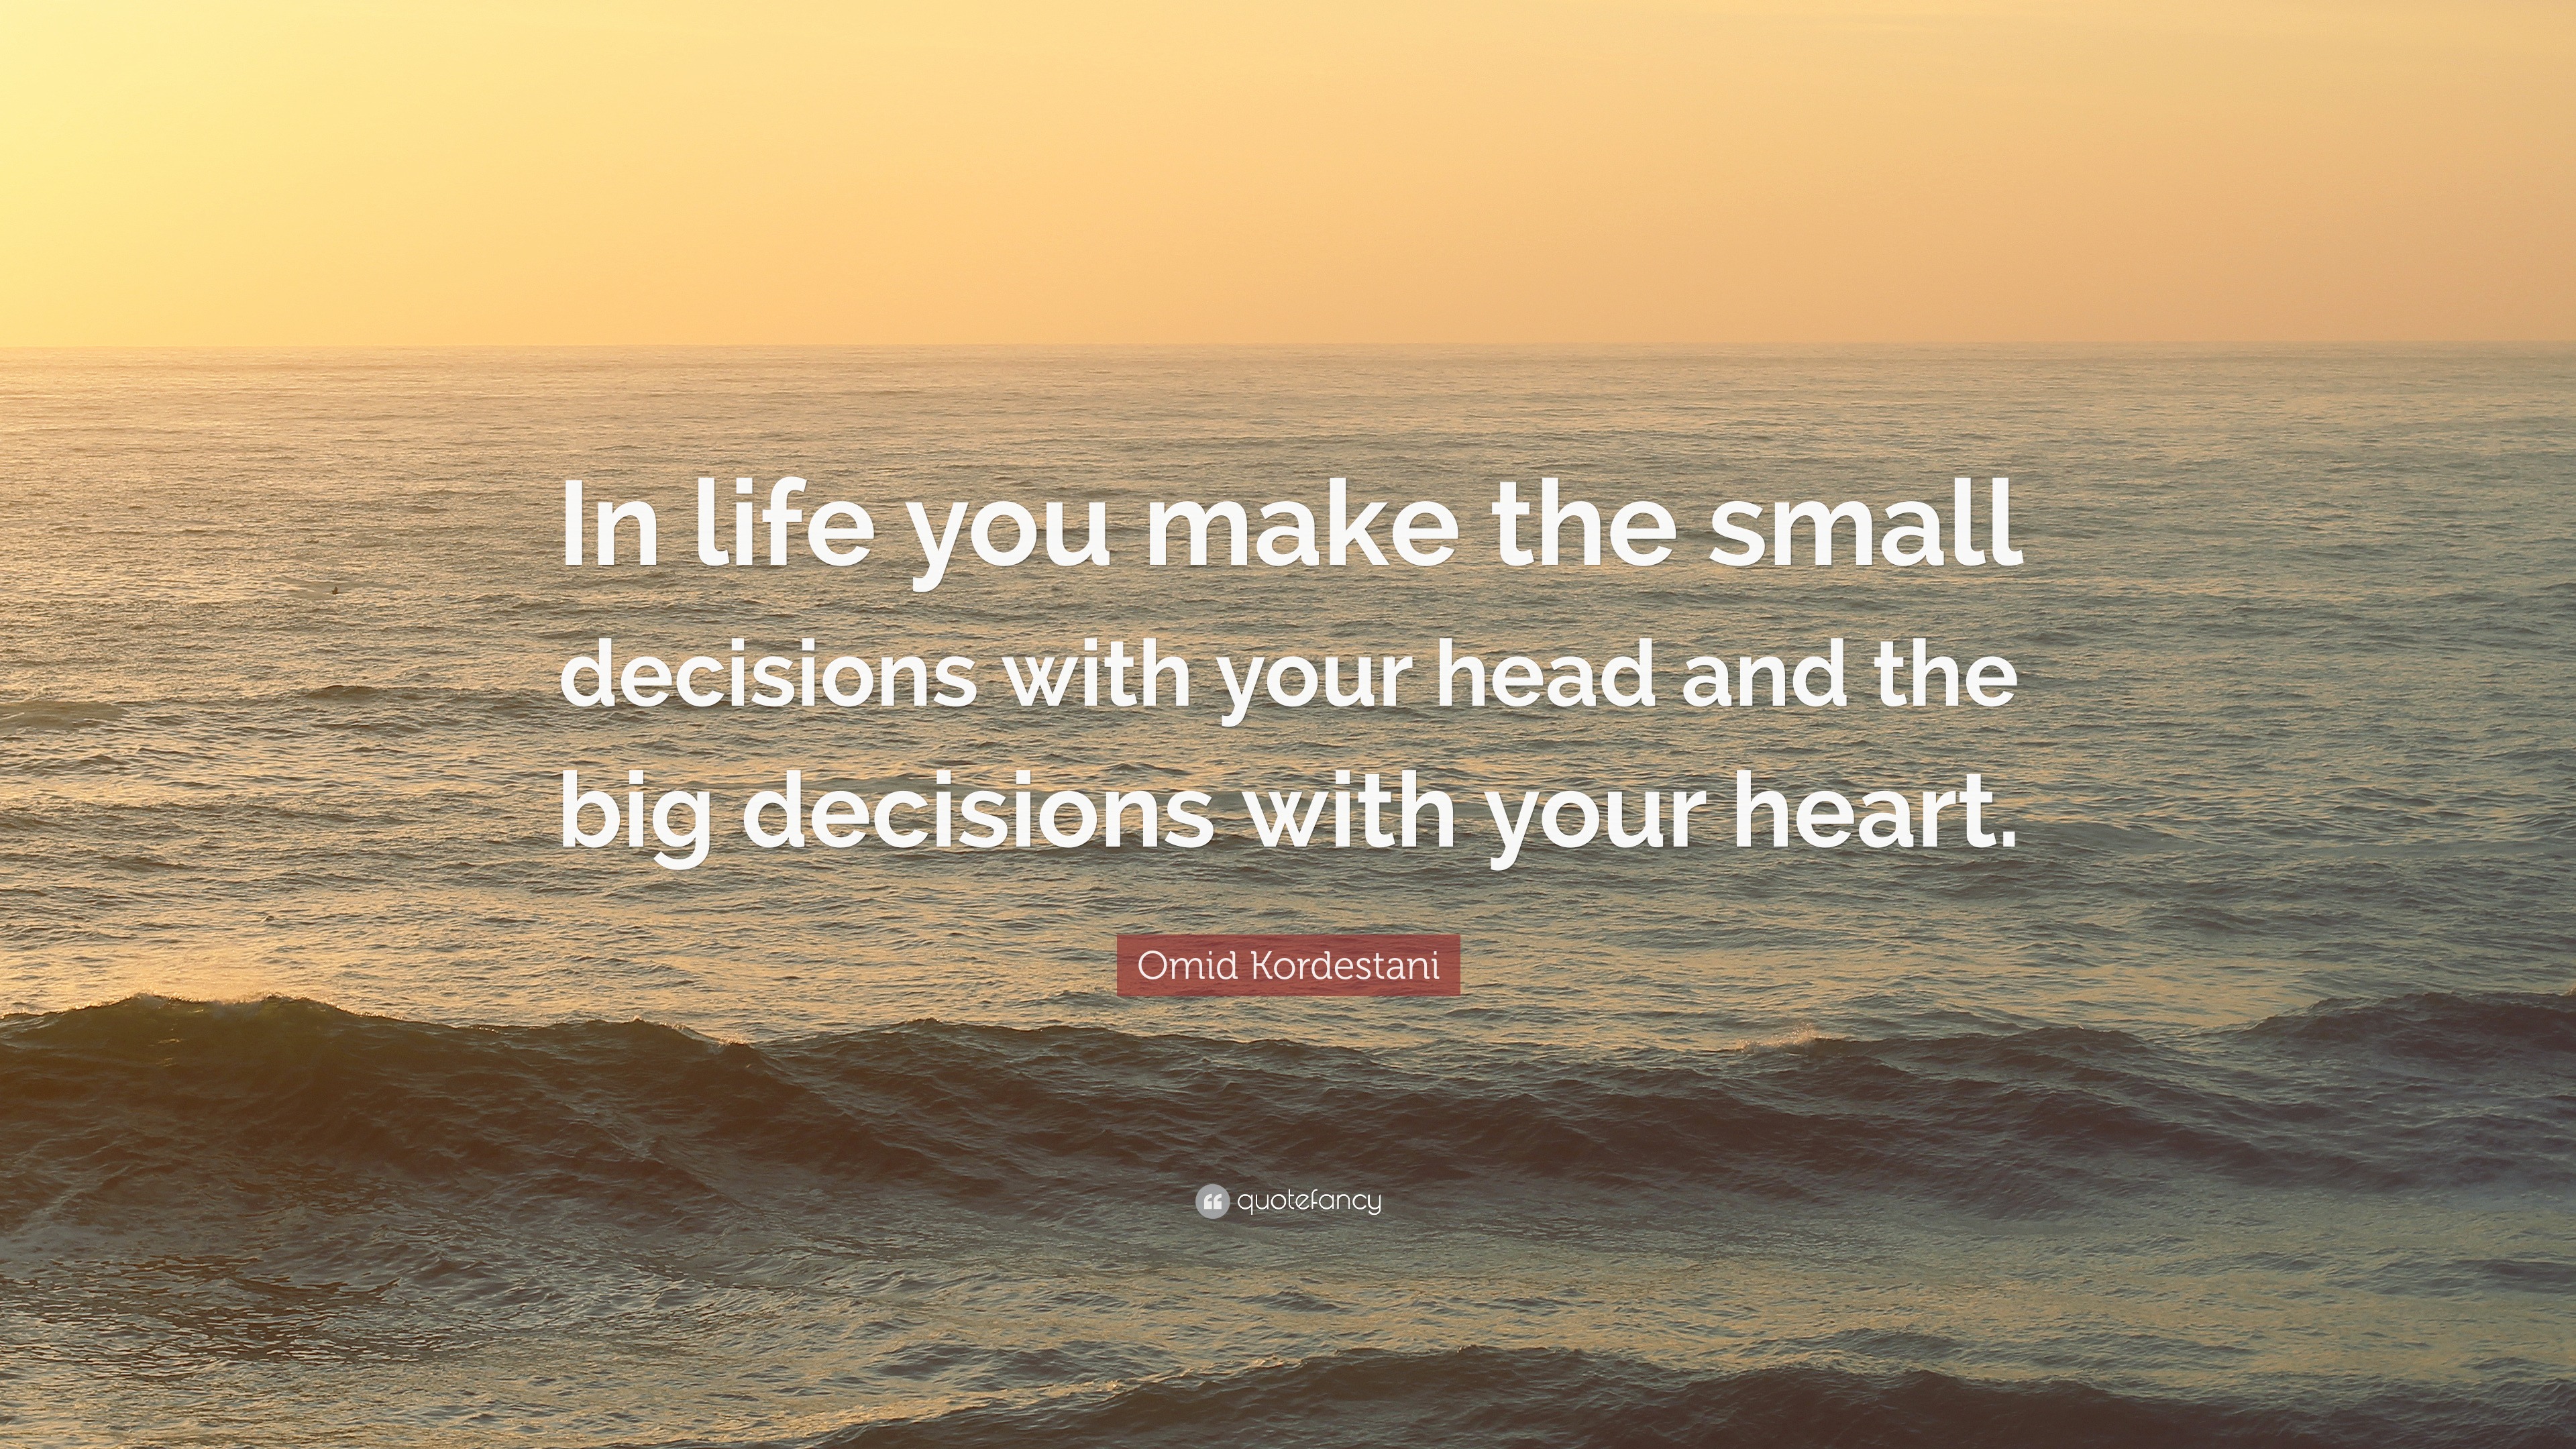 Omid Kordestani Quote “In life you make the small decisions with your head and